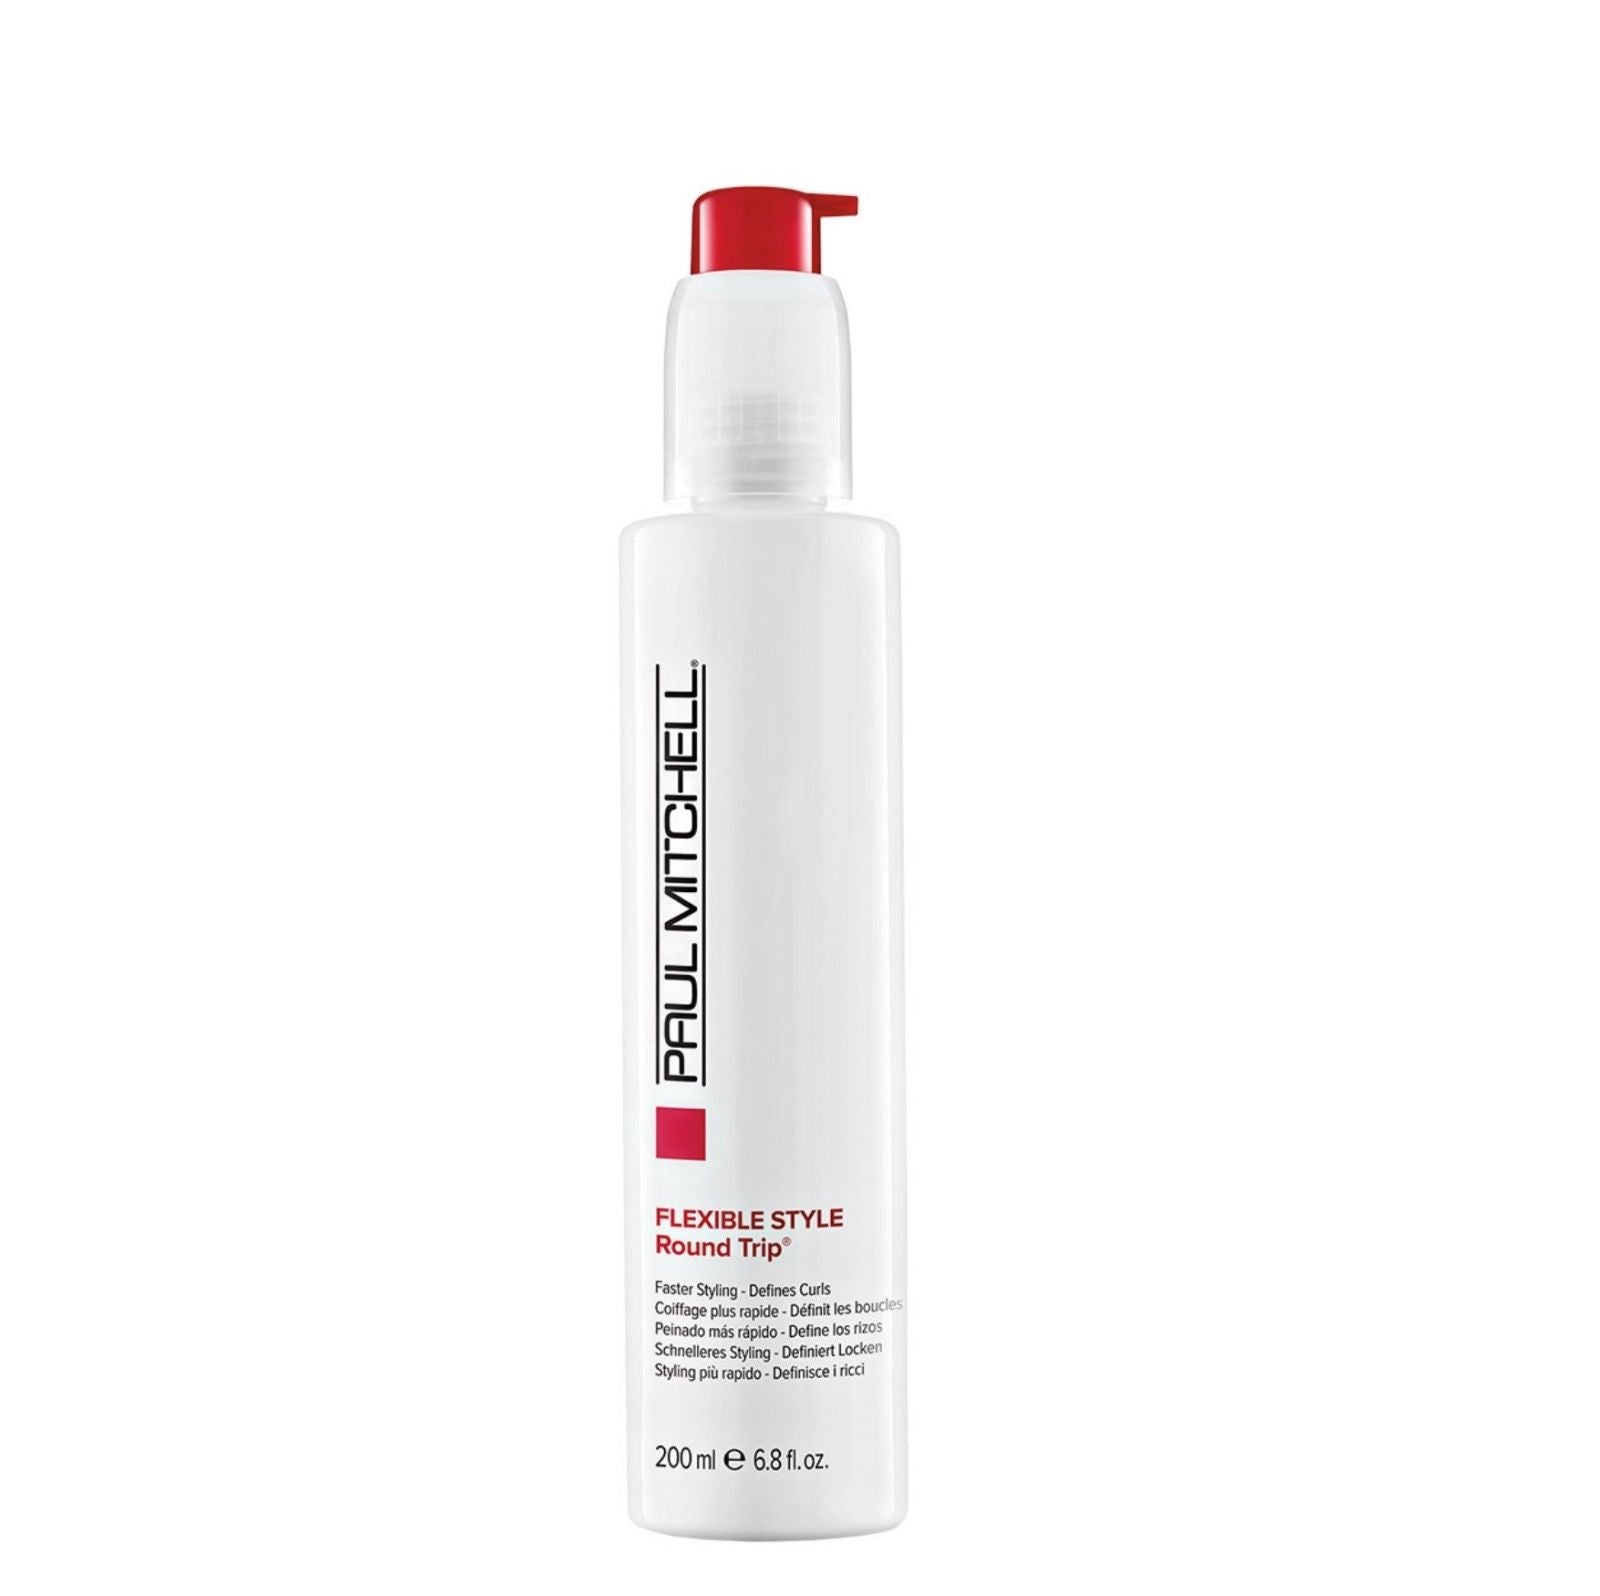 Paul Mitchell Flexible Style Round Trip Faster Styling Defines Curls 200ml Paul Mitchell Styling - On Line Hair Depot